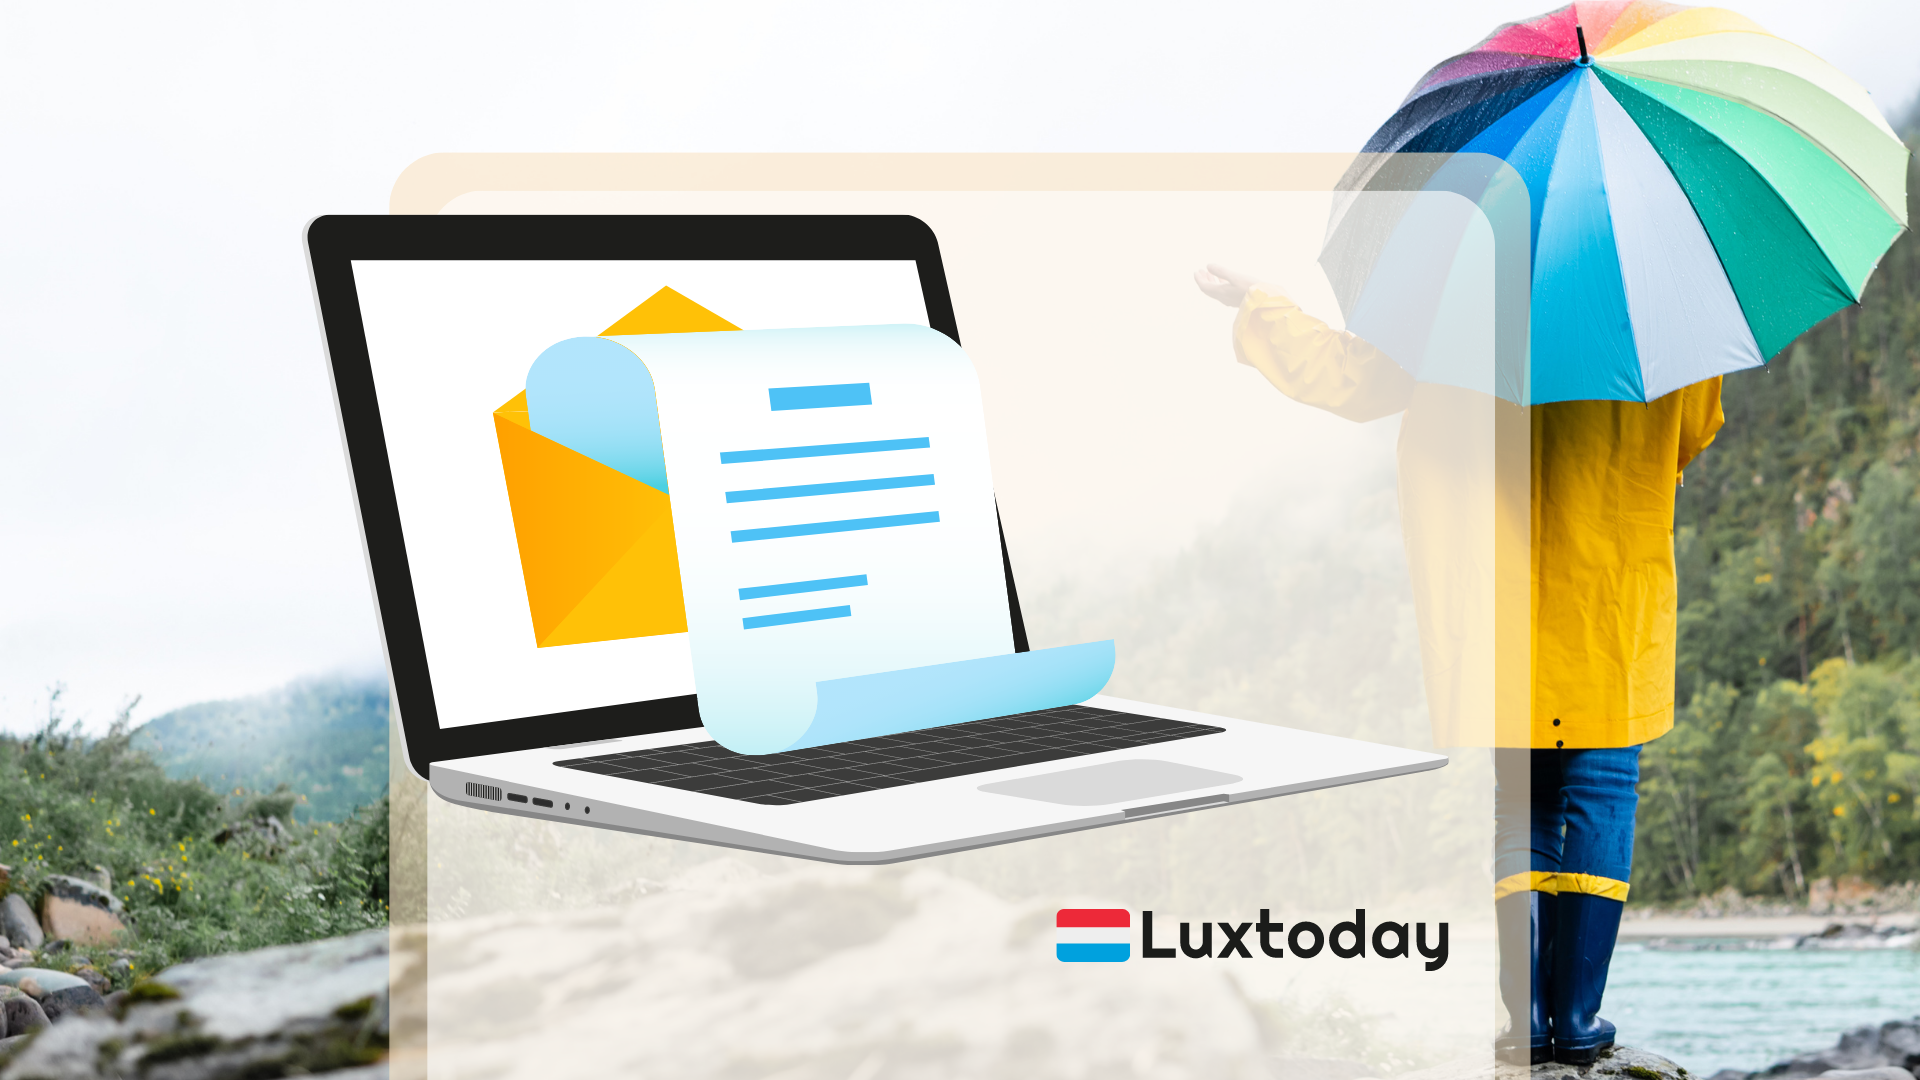 Morning news digest now on the website: Luxtoday company blog